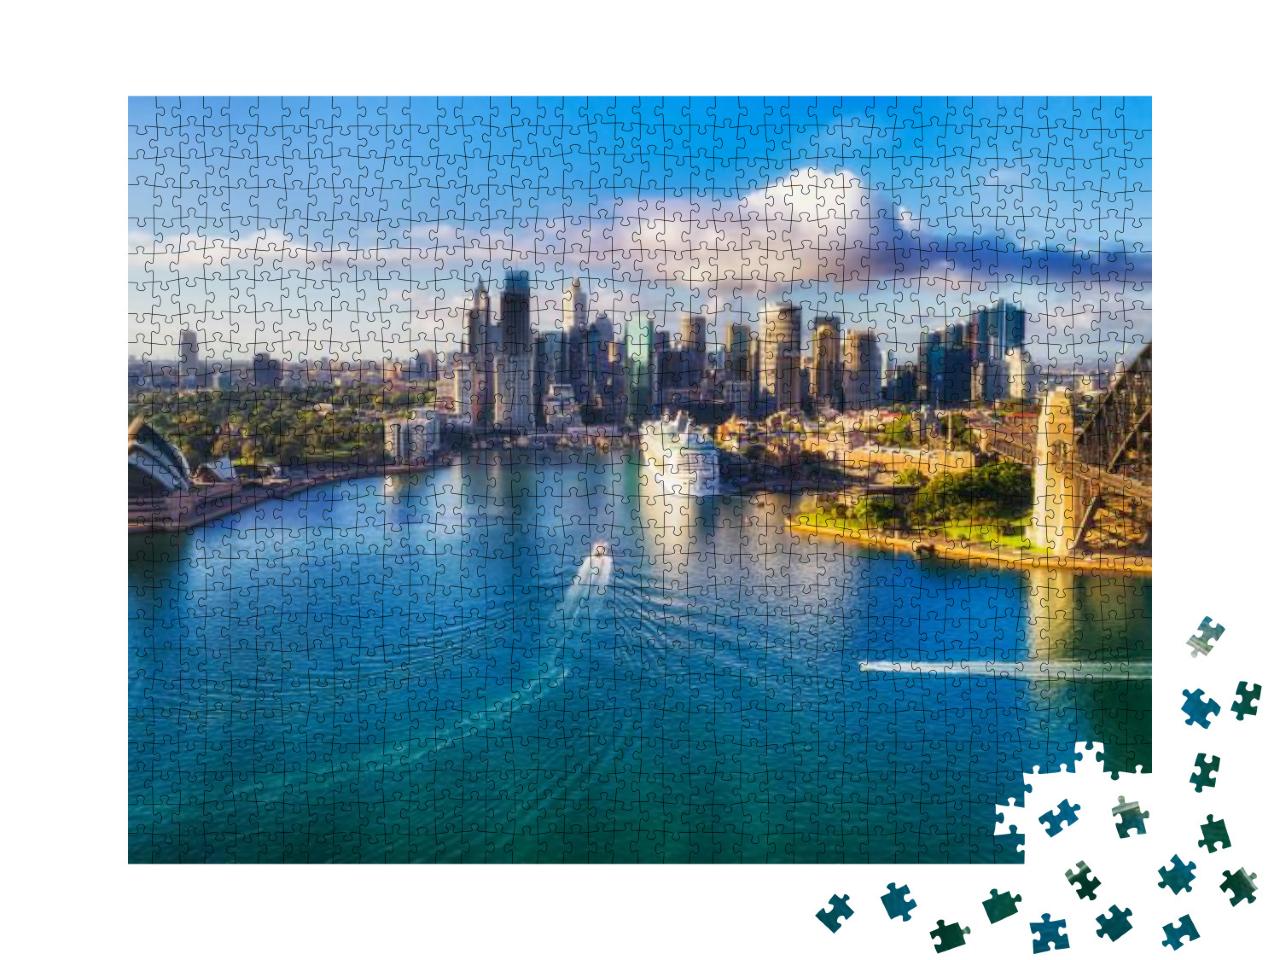 Major Architecture Landmarks of the City of Sydney & Aust... Jigsaw Puzzle with 1000 pieces